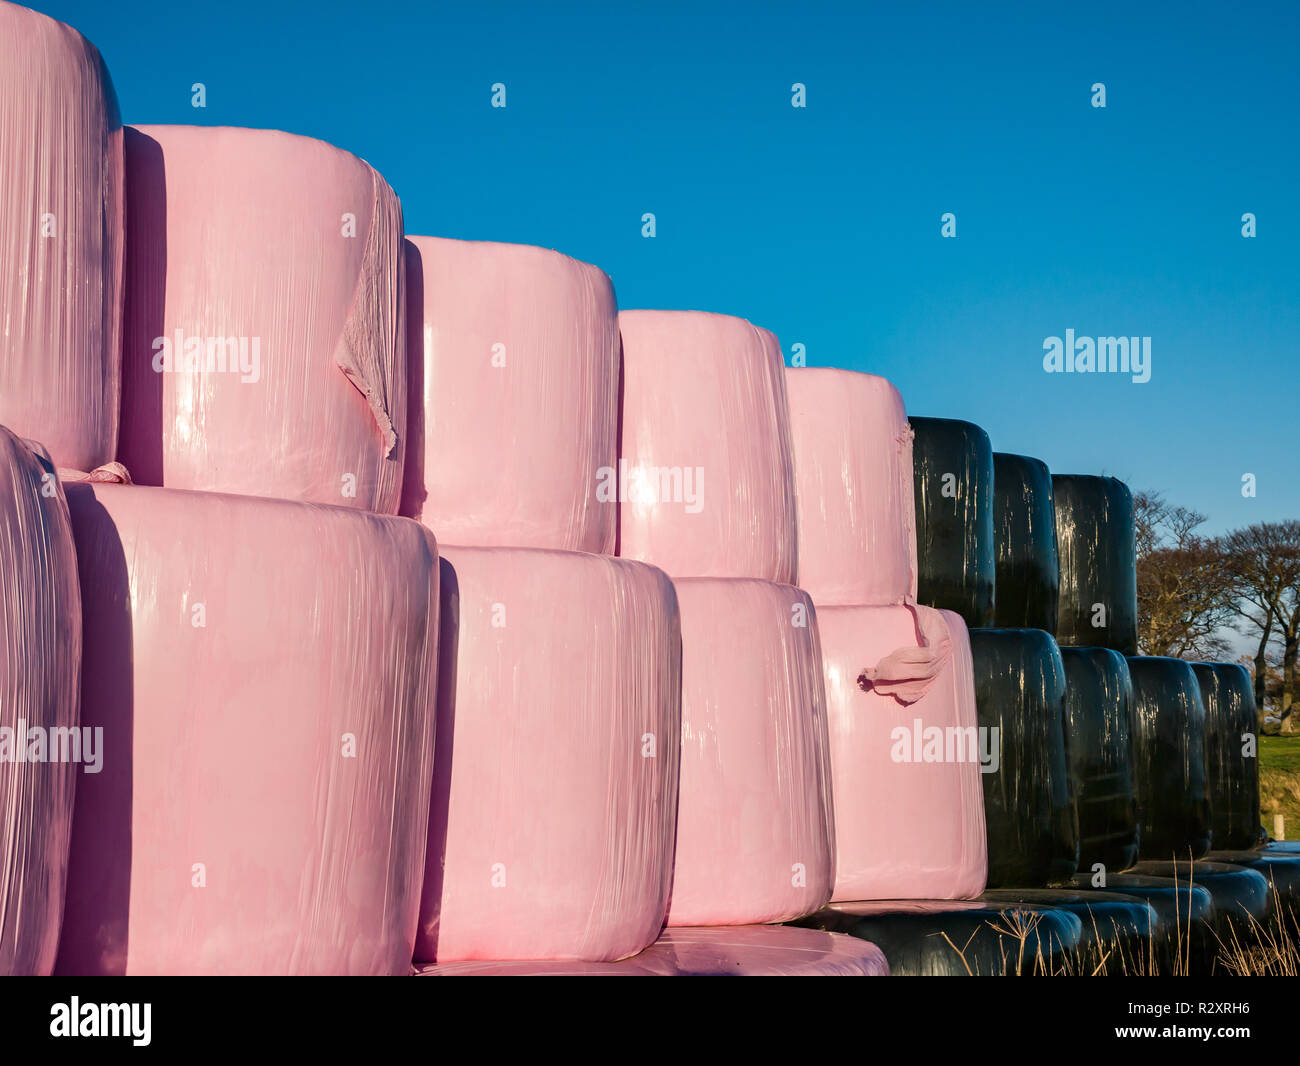 Hay bales piled in rows in a field wrapped in black and pink plastic sheeting on a sunny Autumn day, East Lothian, Scotland, UK Stock Photo